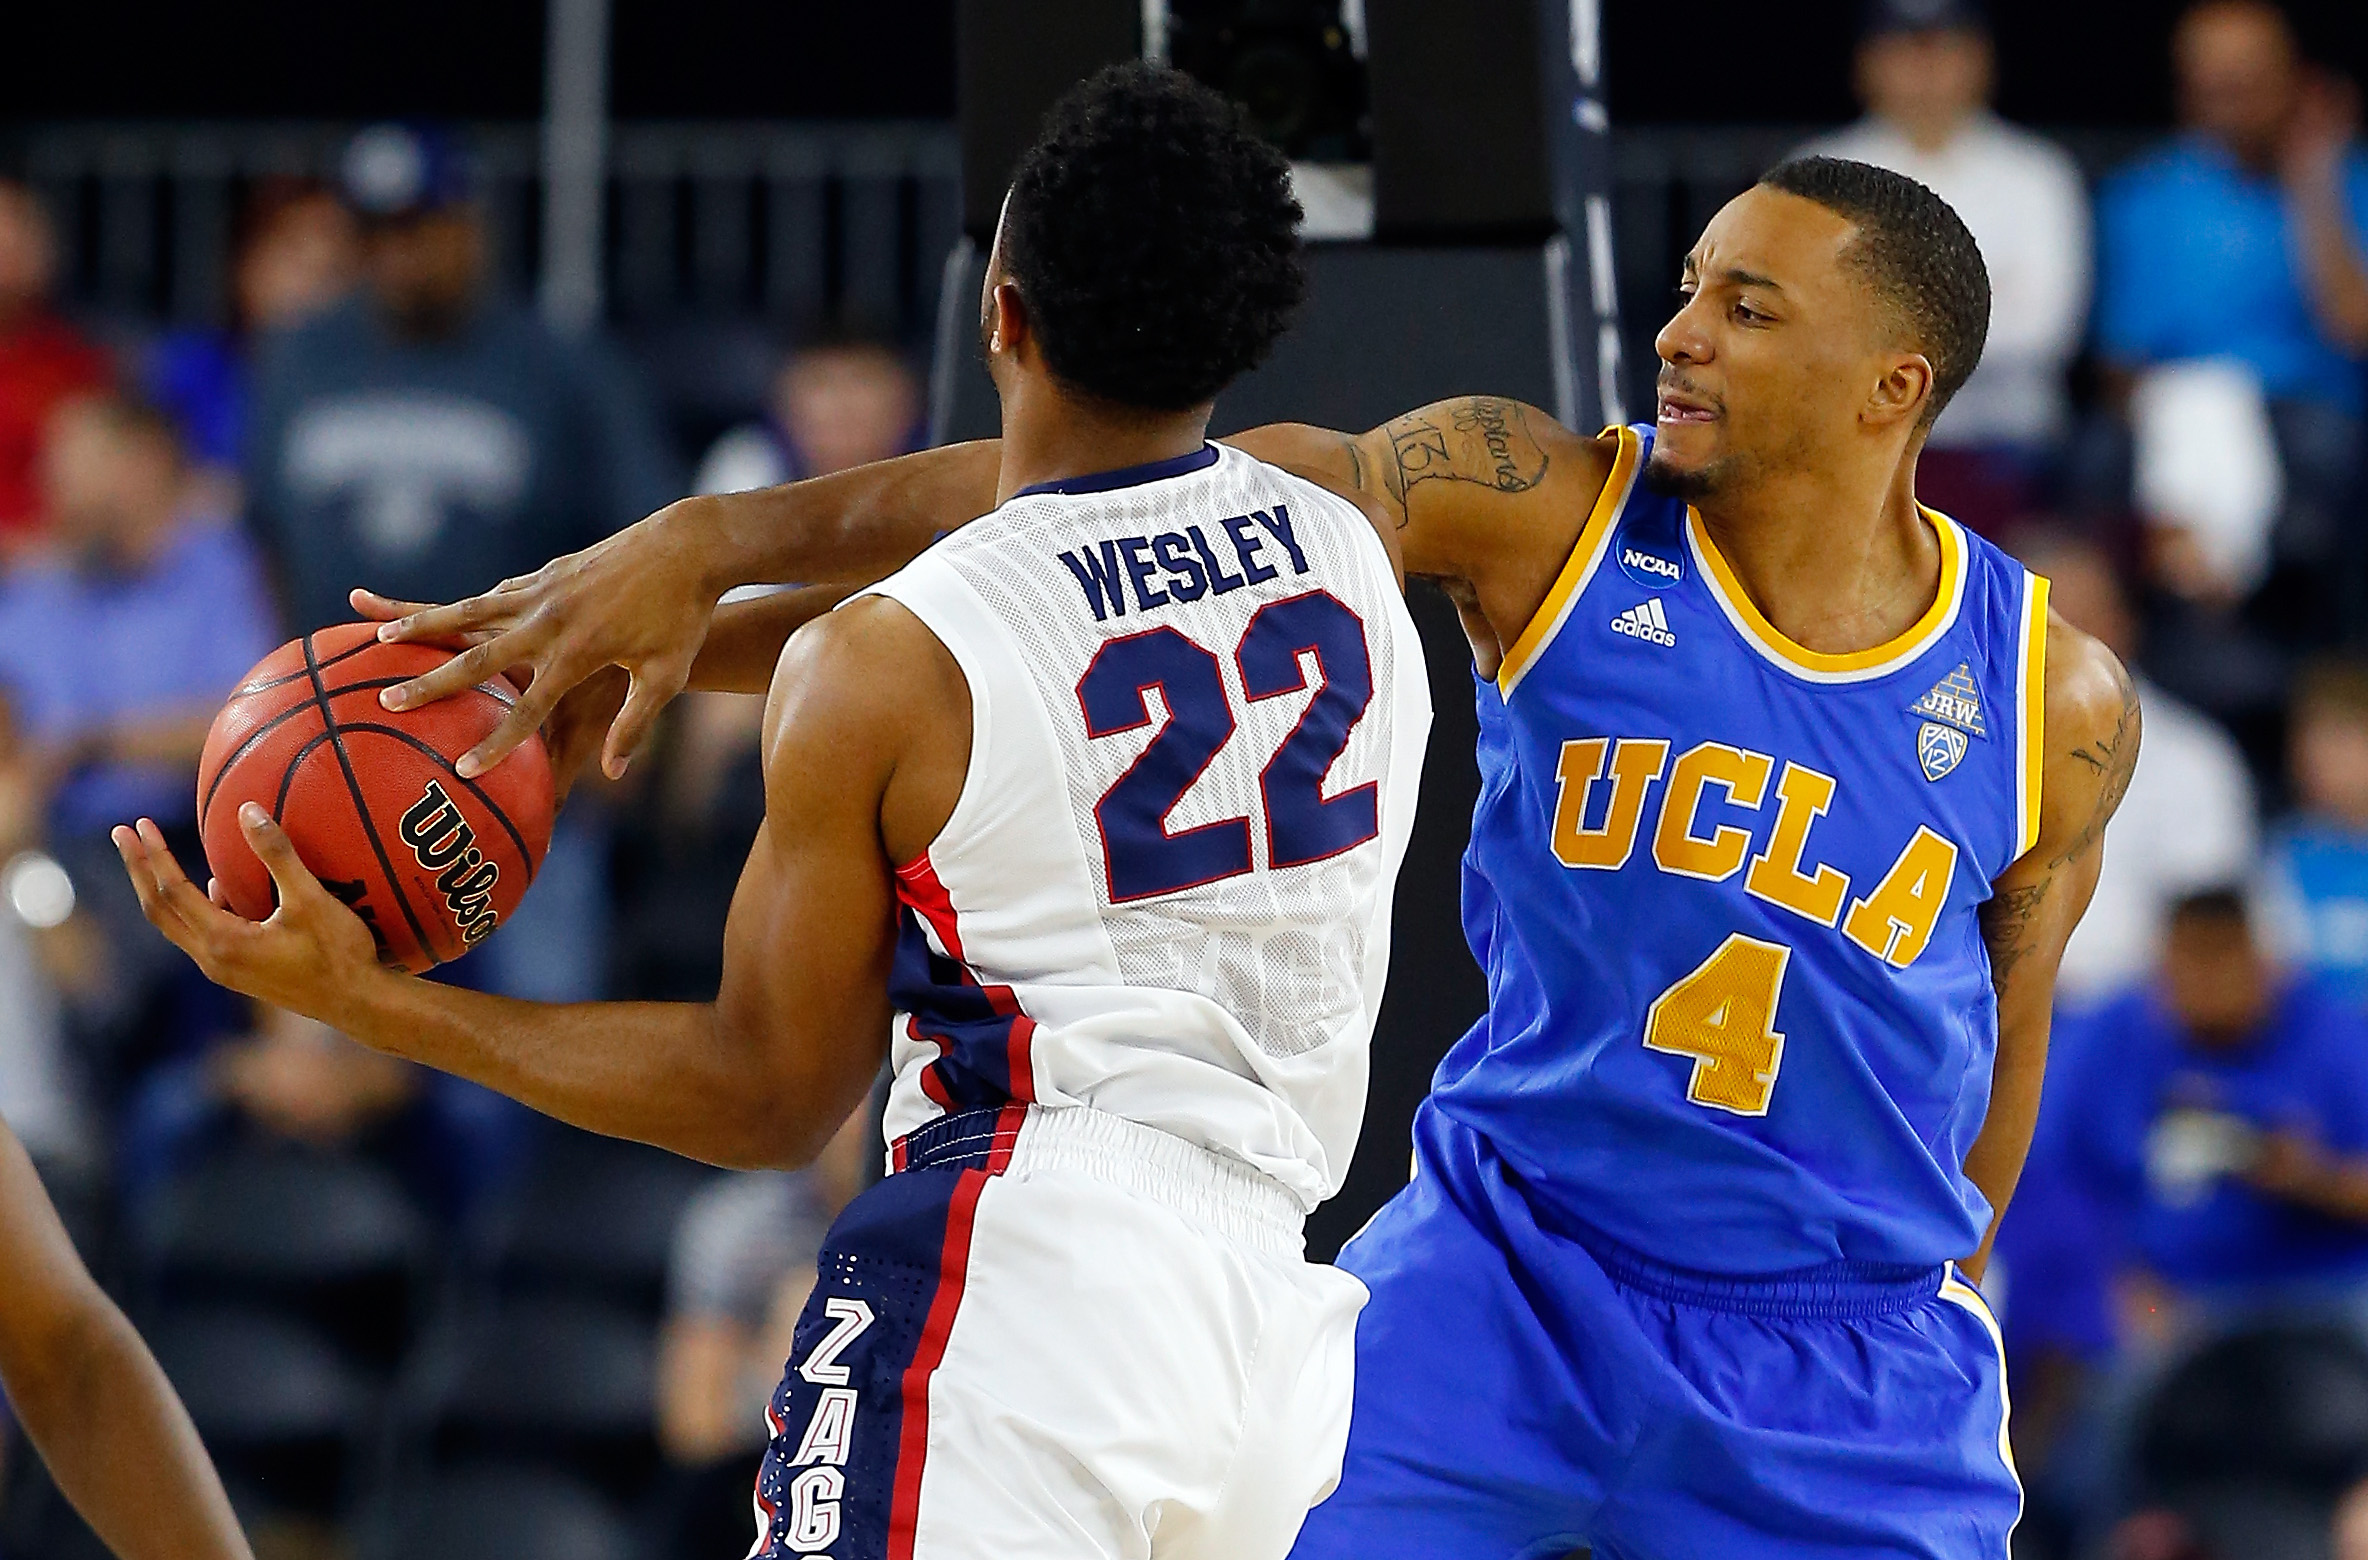 UCLA's Norman Powell defends Byron Wesley during the Bruins' Sweet 16 loss to Gonzaga on March 27. Powell had 16 points, five rebounds and three blocks to end his career at Houston's NRG Stadium. (Tom Pennington/Getty)